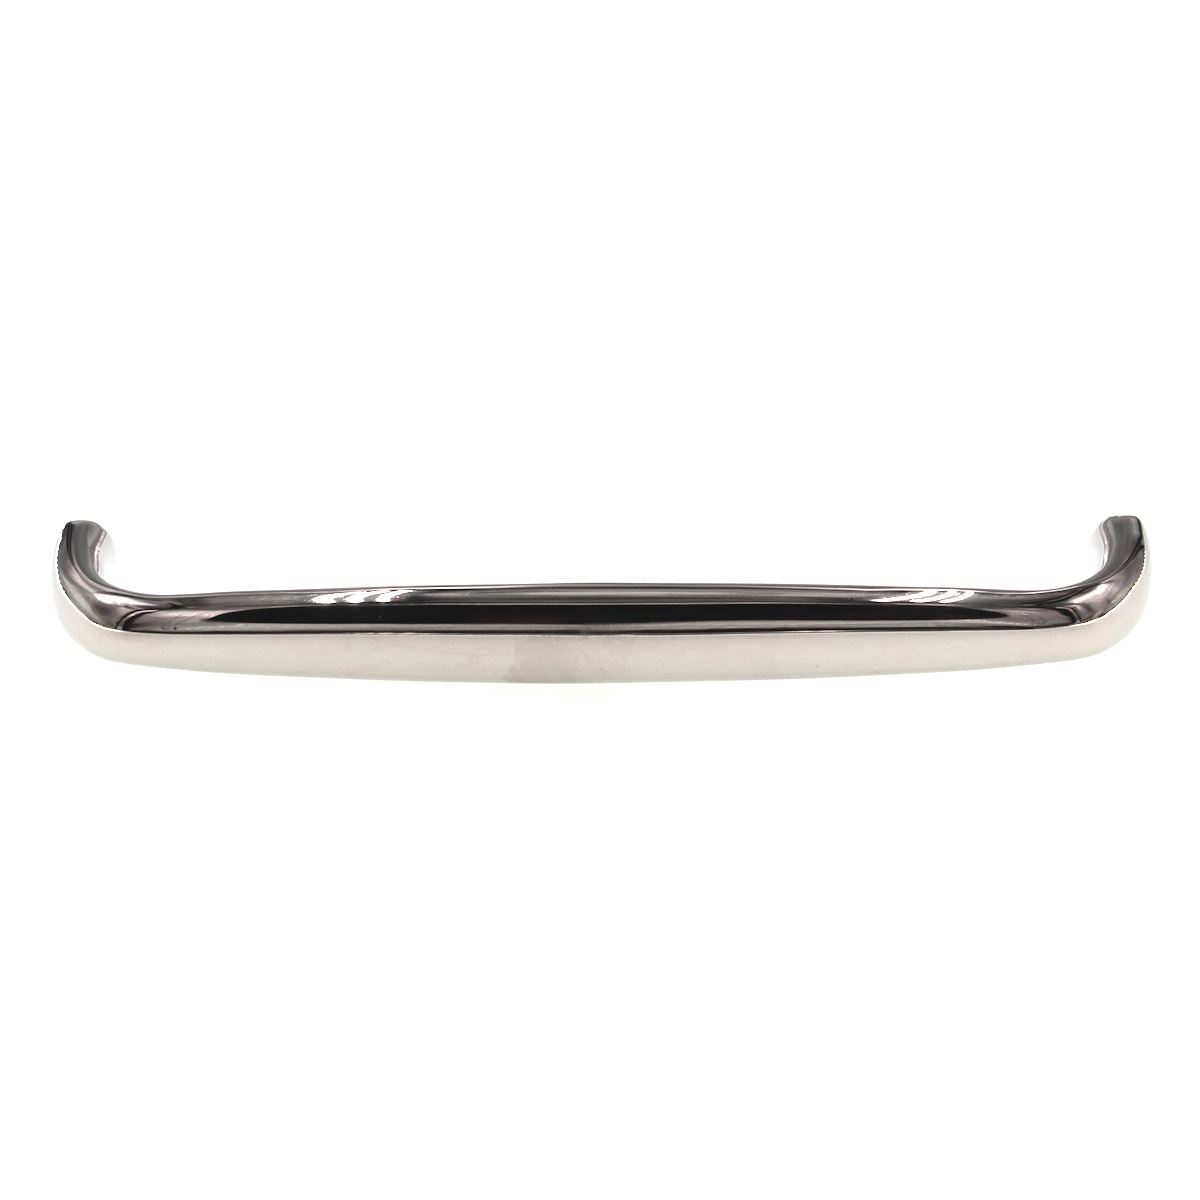 Schaub And Company Traditional Cabinet Arch Pull 6" Ctr Polished Nickel 737-PN